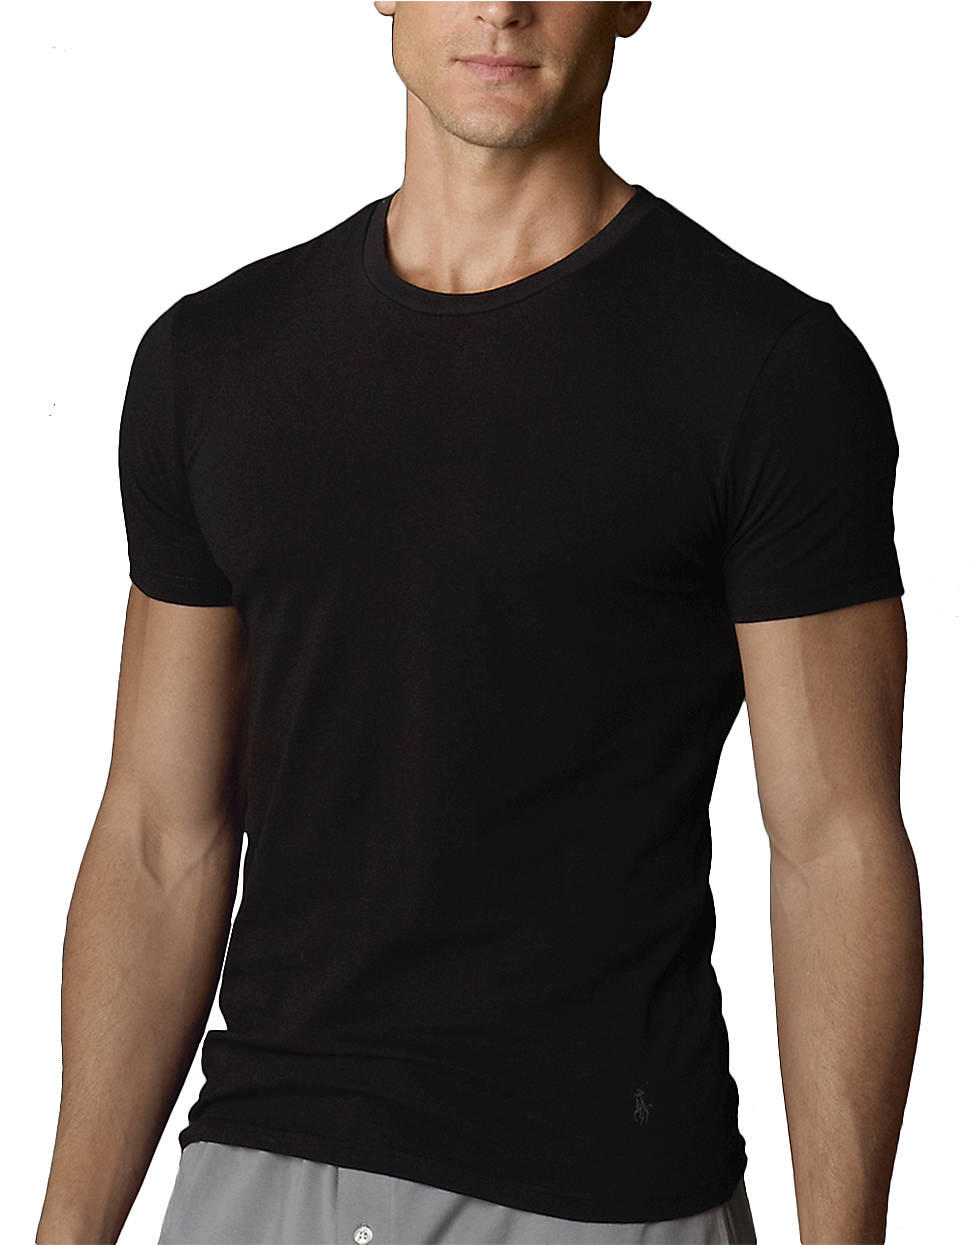 Lyst Polo Ralph Lauren Two Pack Slim Fit Crewneck T Shirts In Black For Men 4459